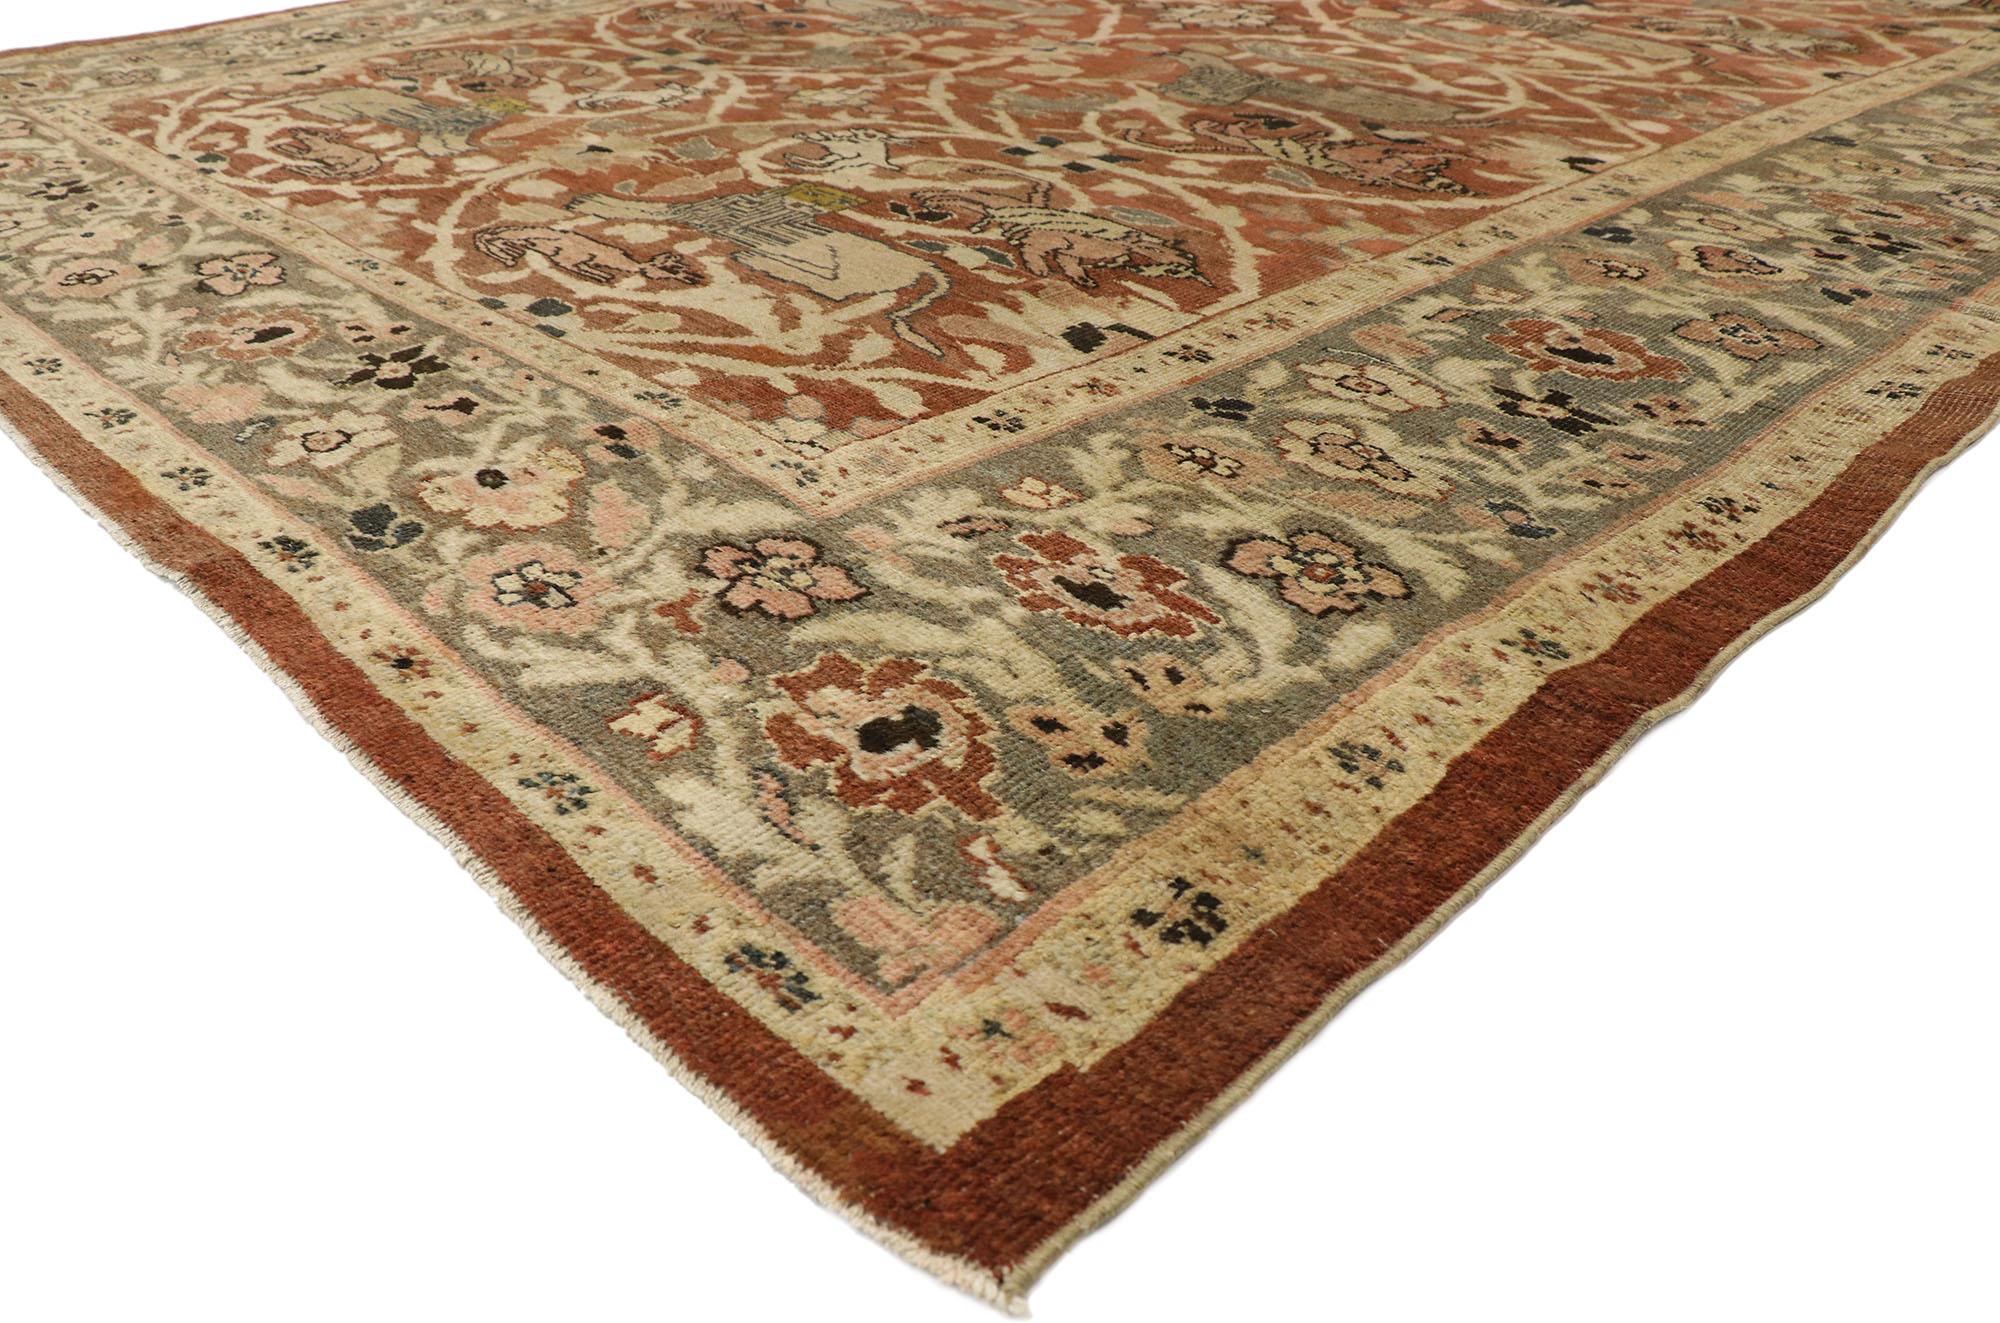 74840 distressed antique Persian Sultanabad Rug with Hunting Scene and Arts & Crafts Style. The architectural elements of naturalistic forms combined with Arts & Crafts style, this hand knotted wool antique Persian Sultanabad rug astounds with its